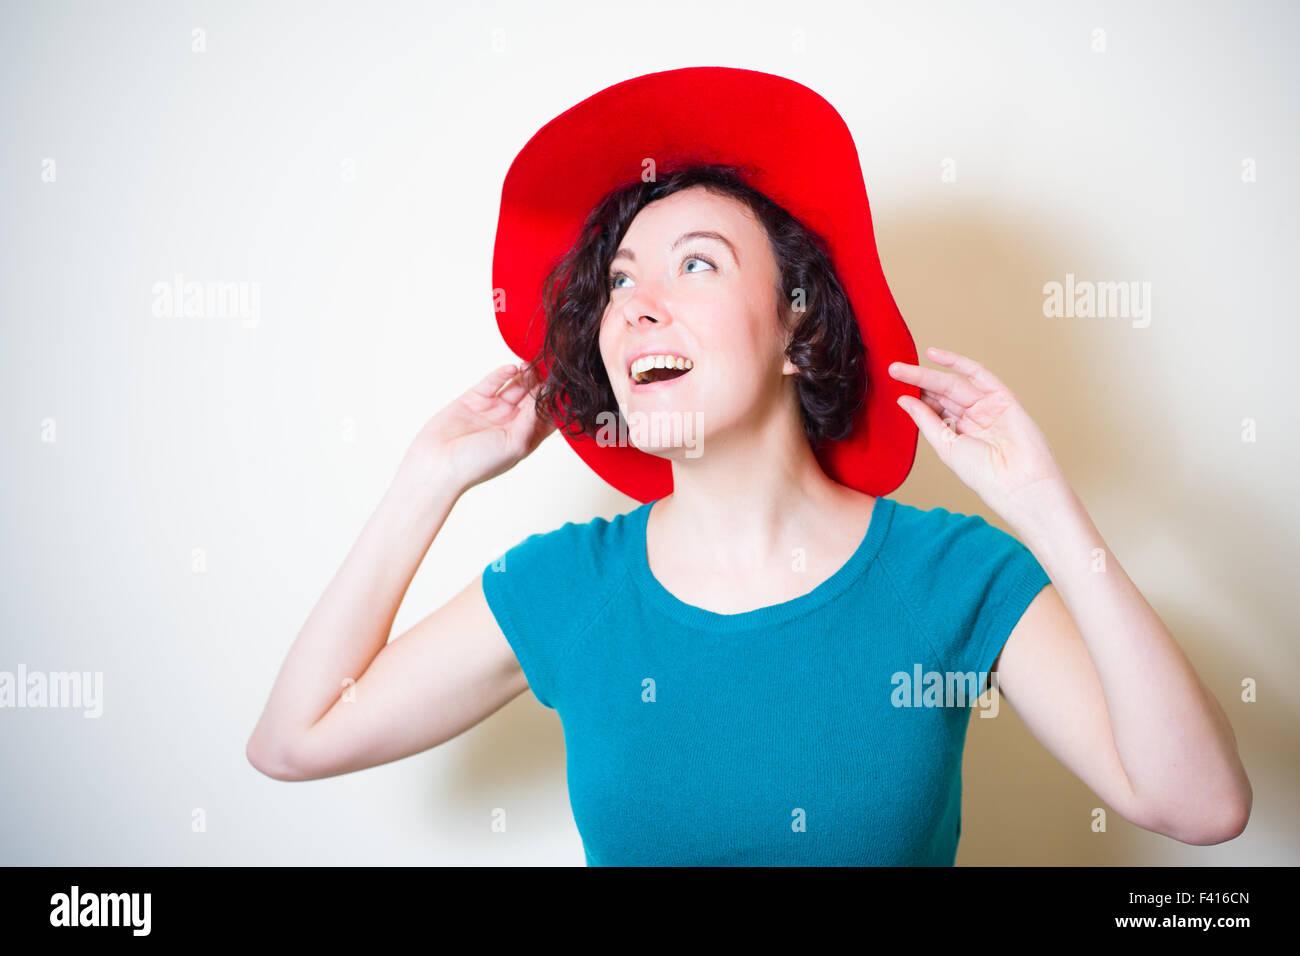 Young woman with red hat and blue dress posing looking up Stock Photo